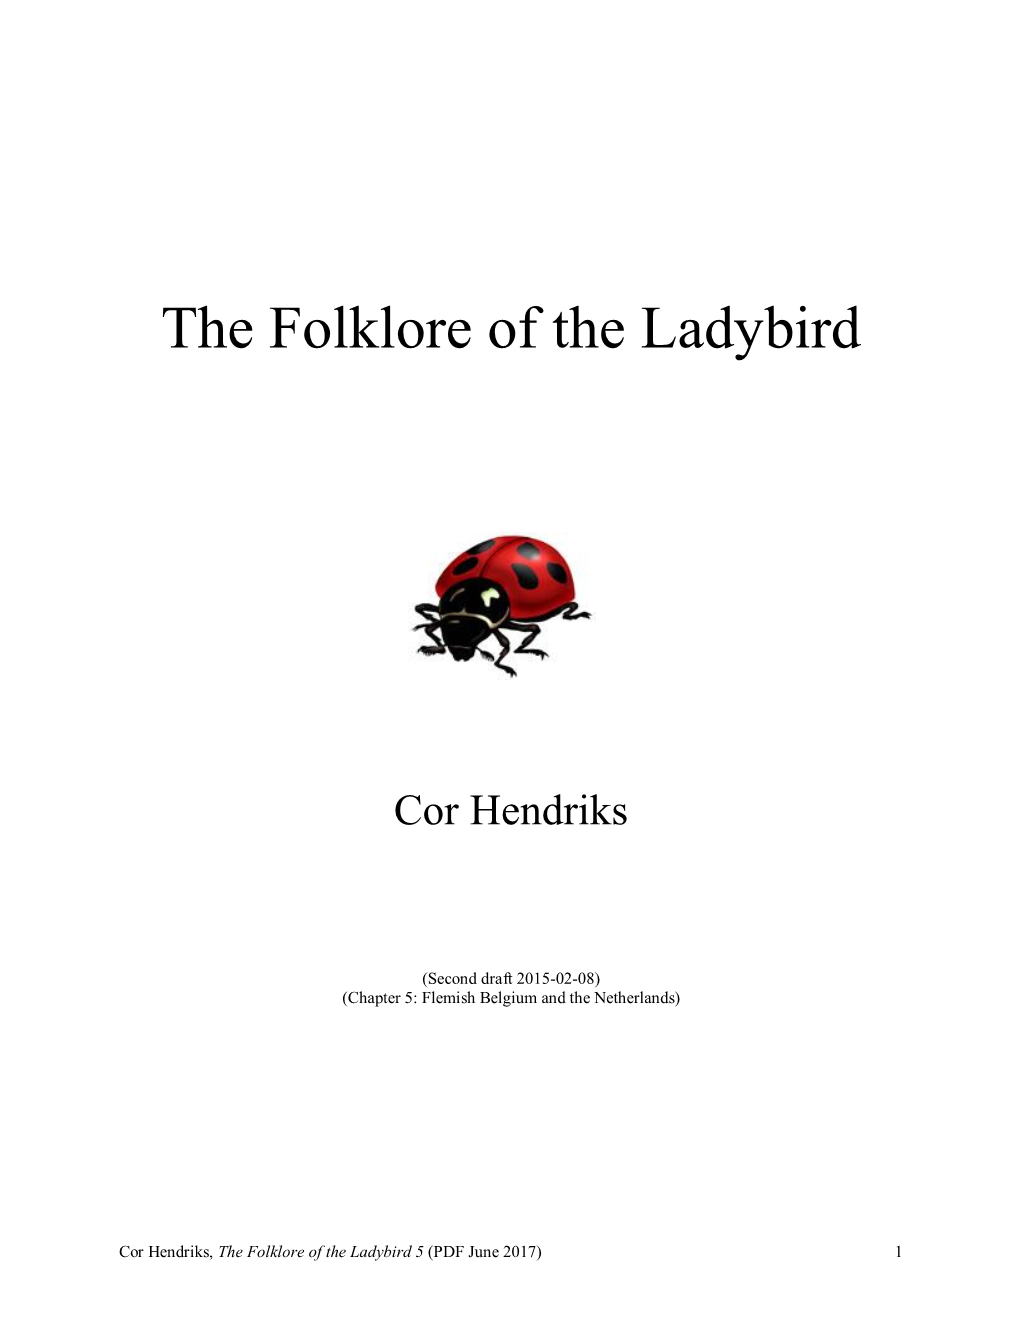 Cor Hendriks – the Folklore of the Ladybird